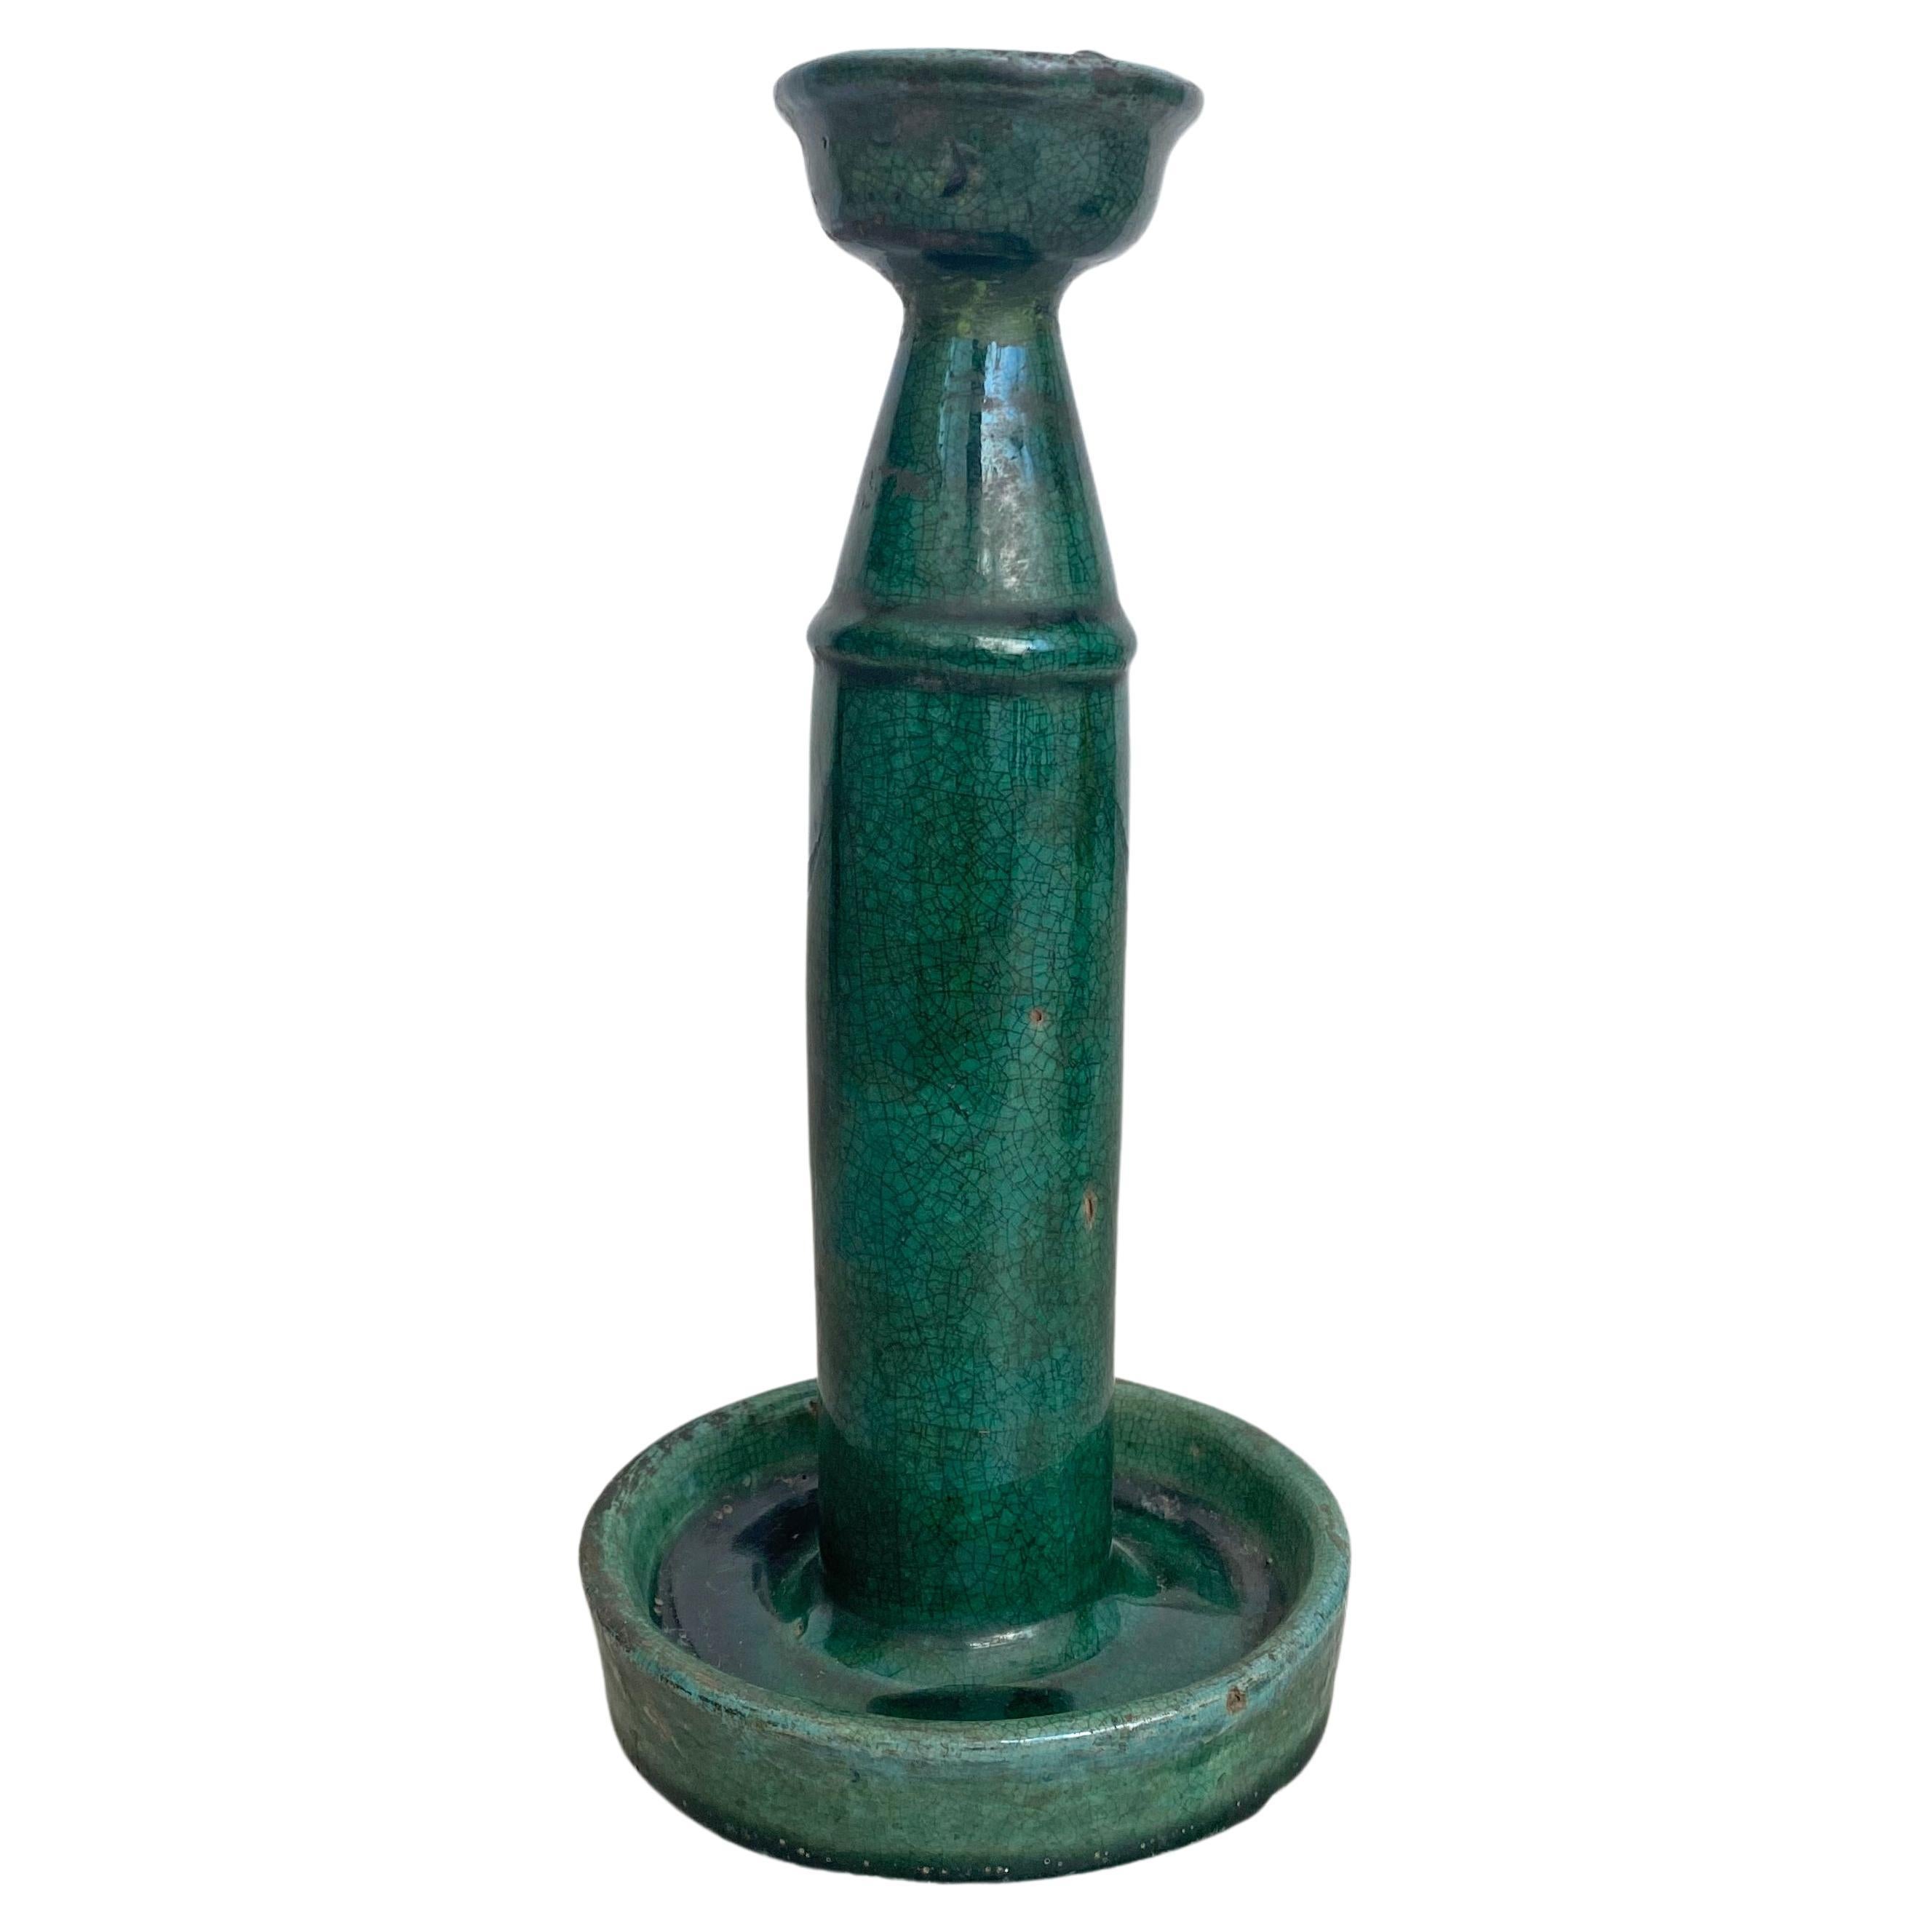 Chinese Ceramic 'Shiwan' Oil Lamp / Candleholder, Green Glaze, c. 1900 For Sale